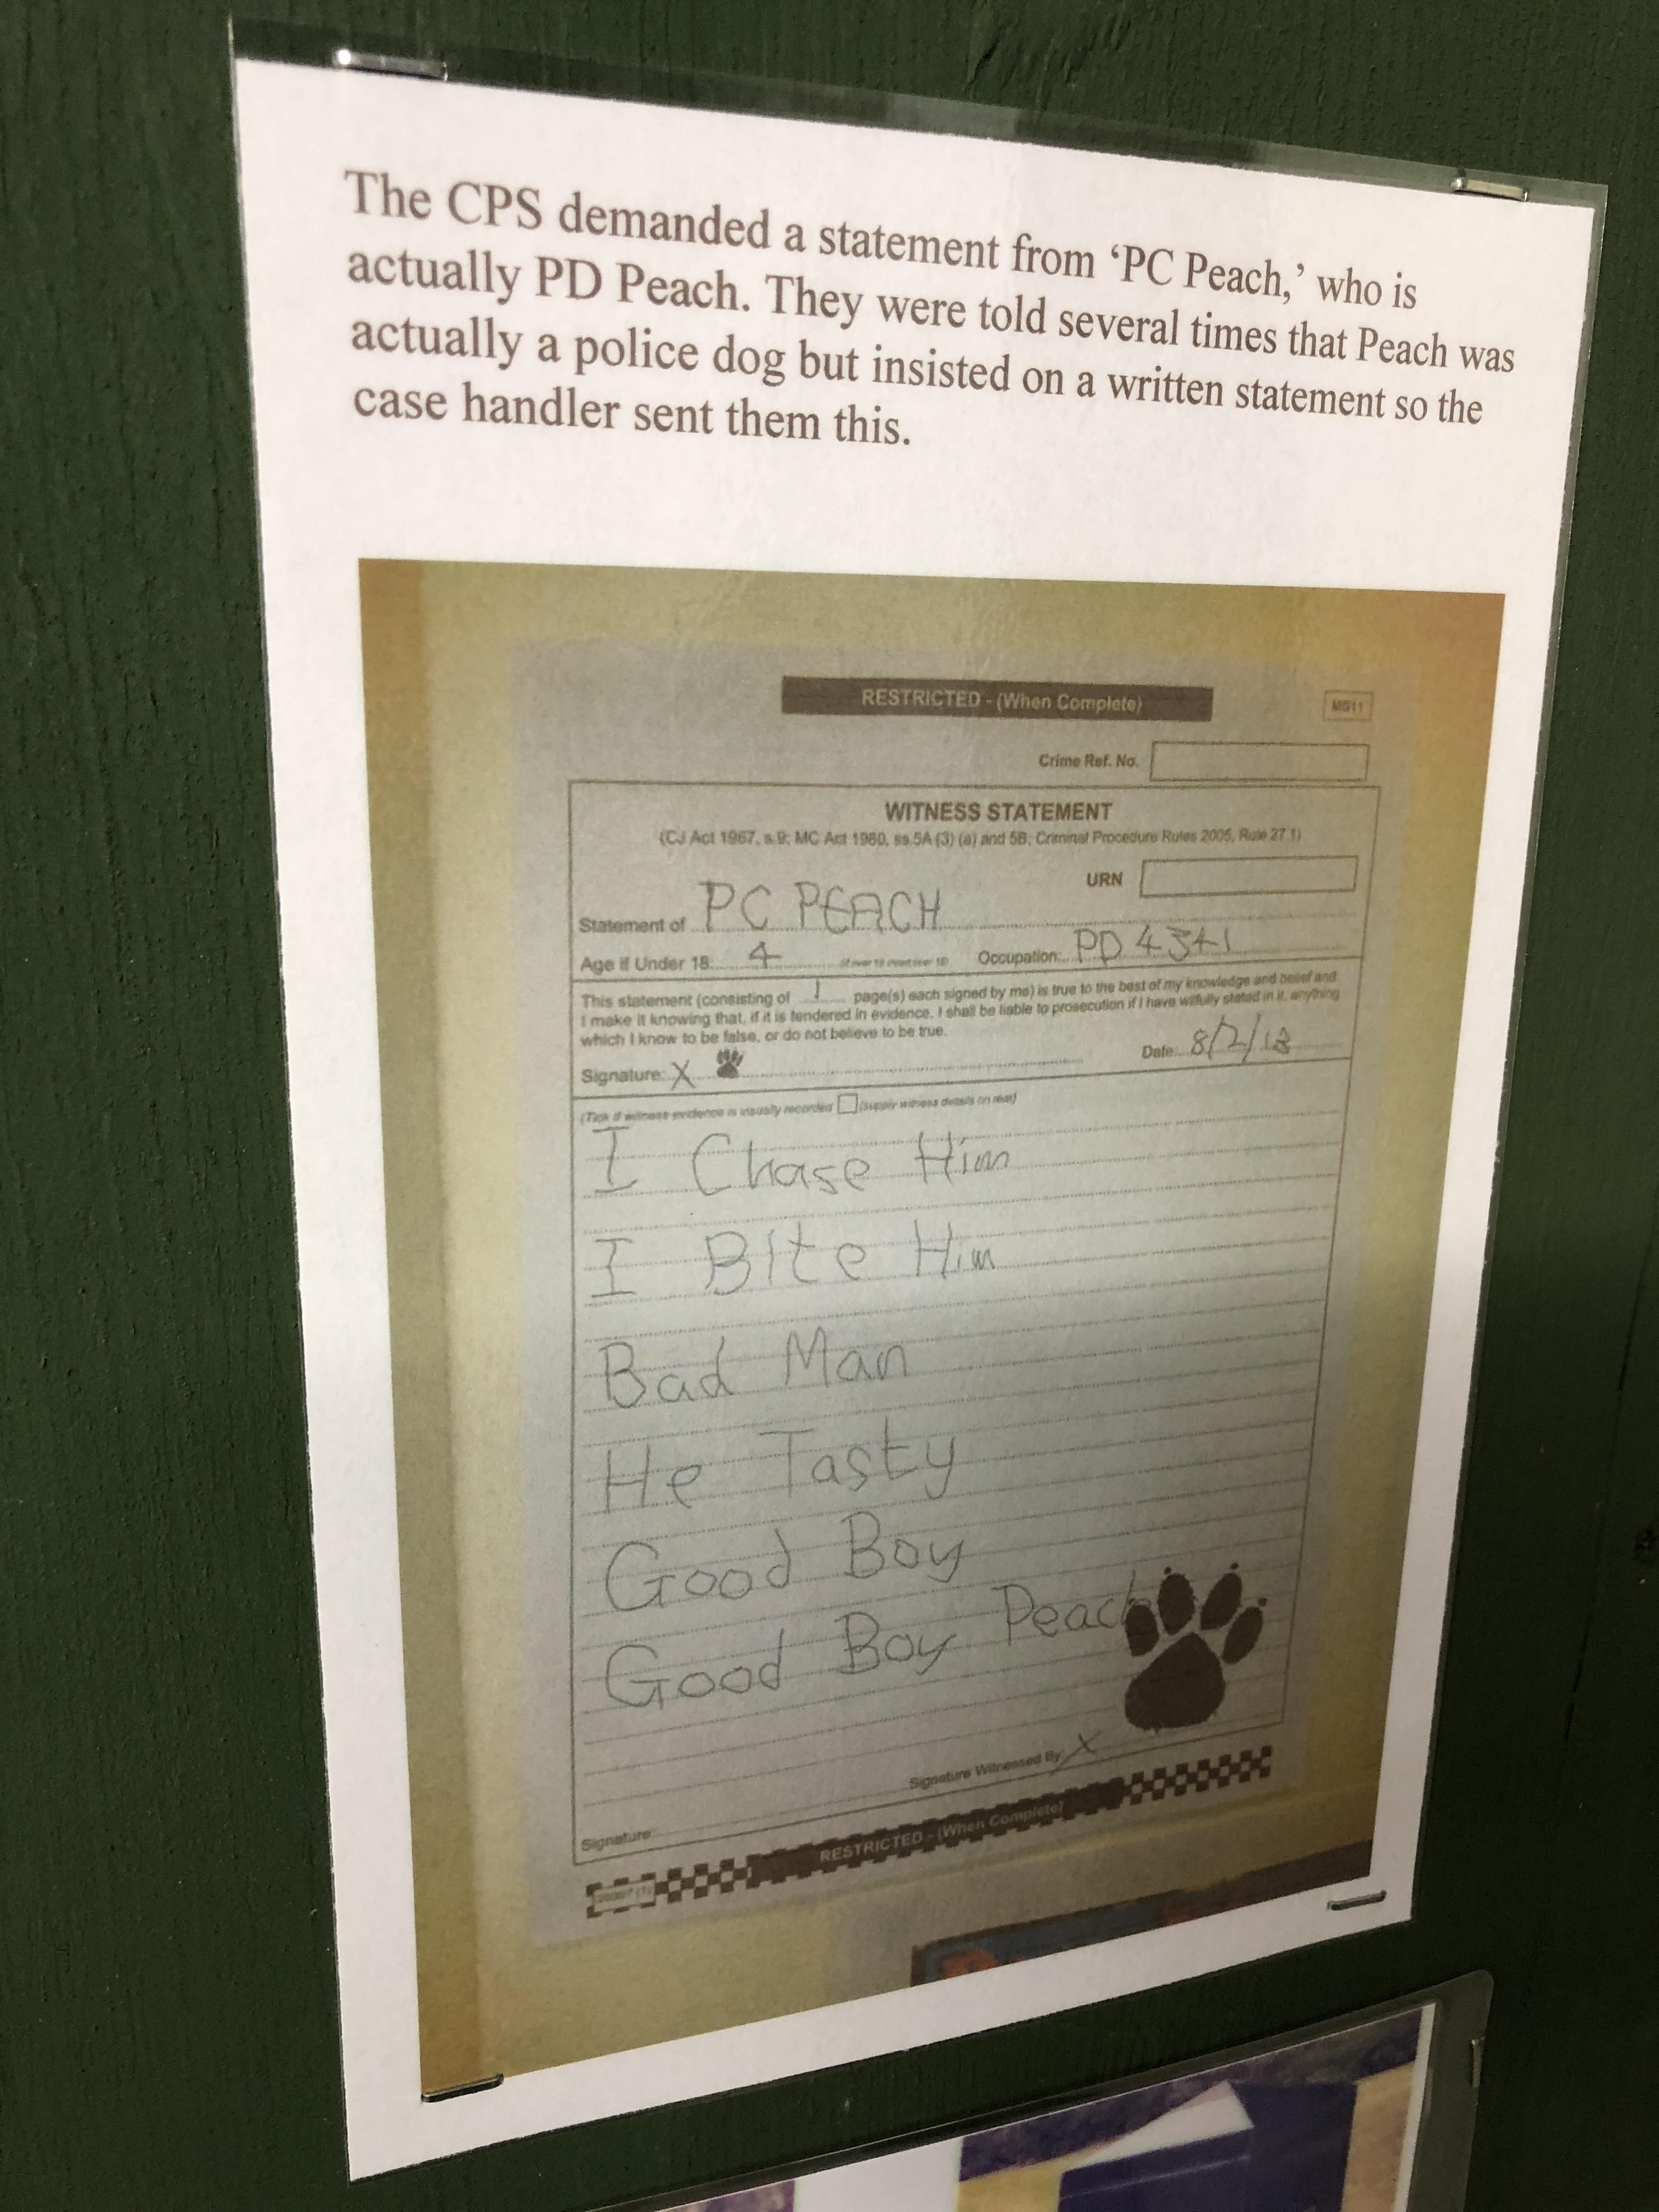 Visited a RAF museum in Cornwall and saw this police statement.